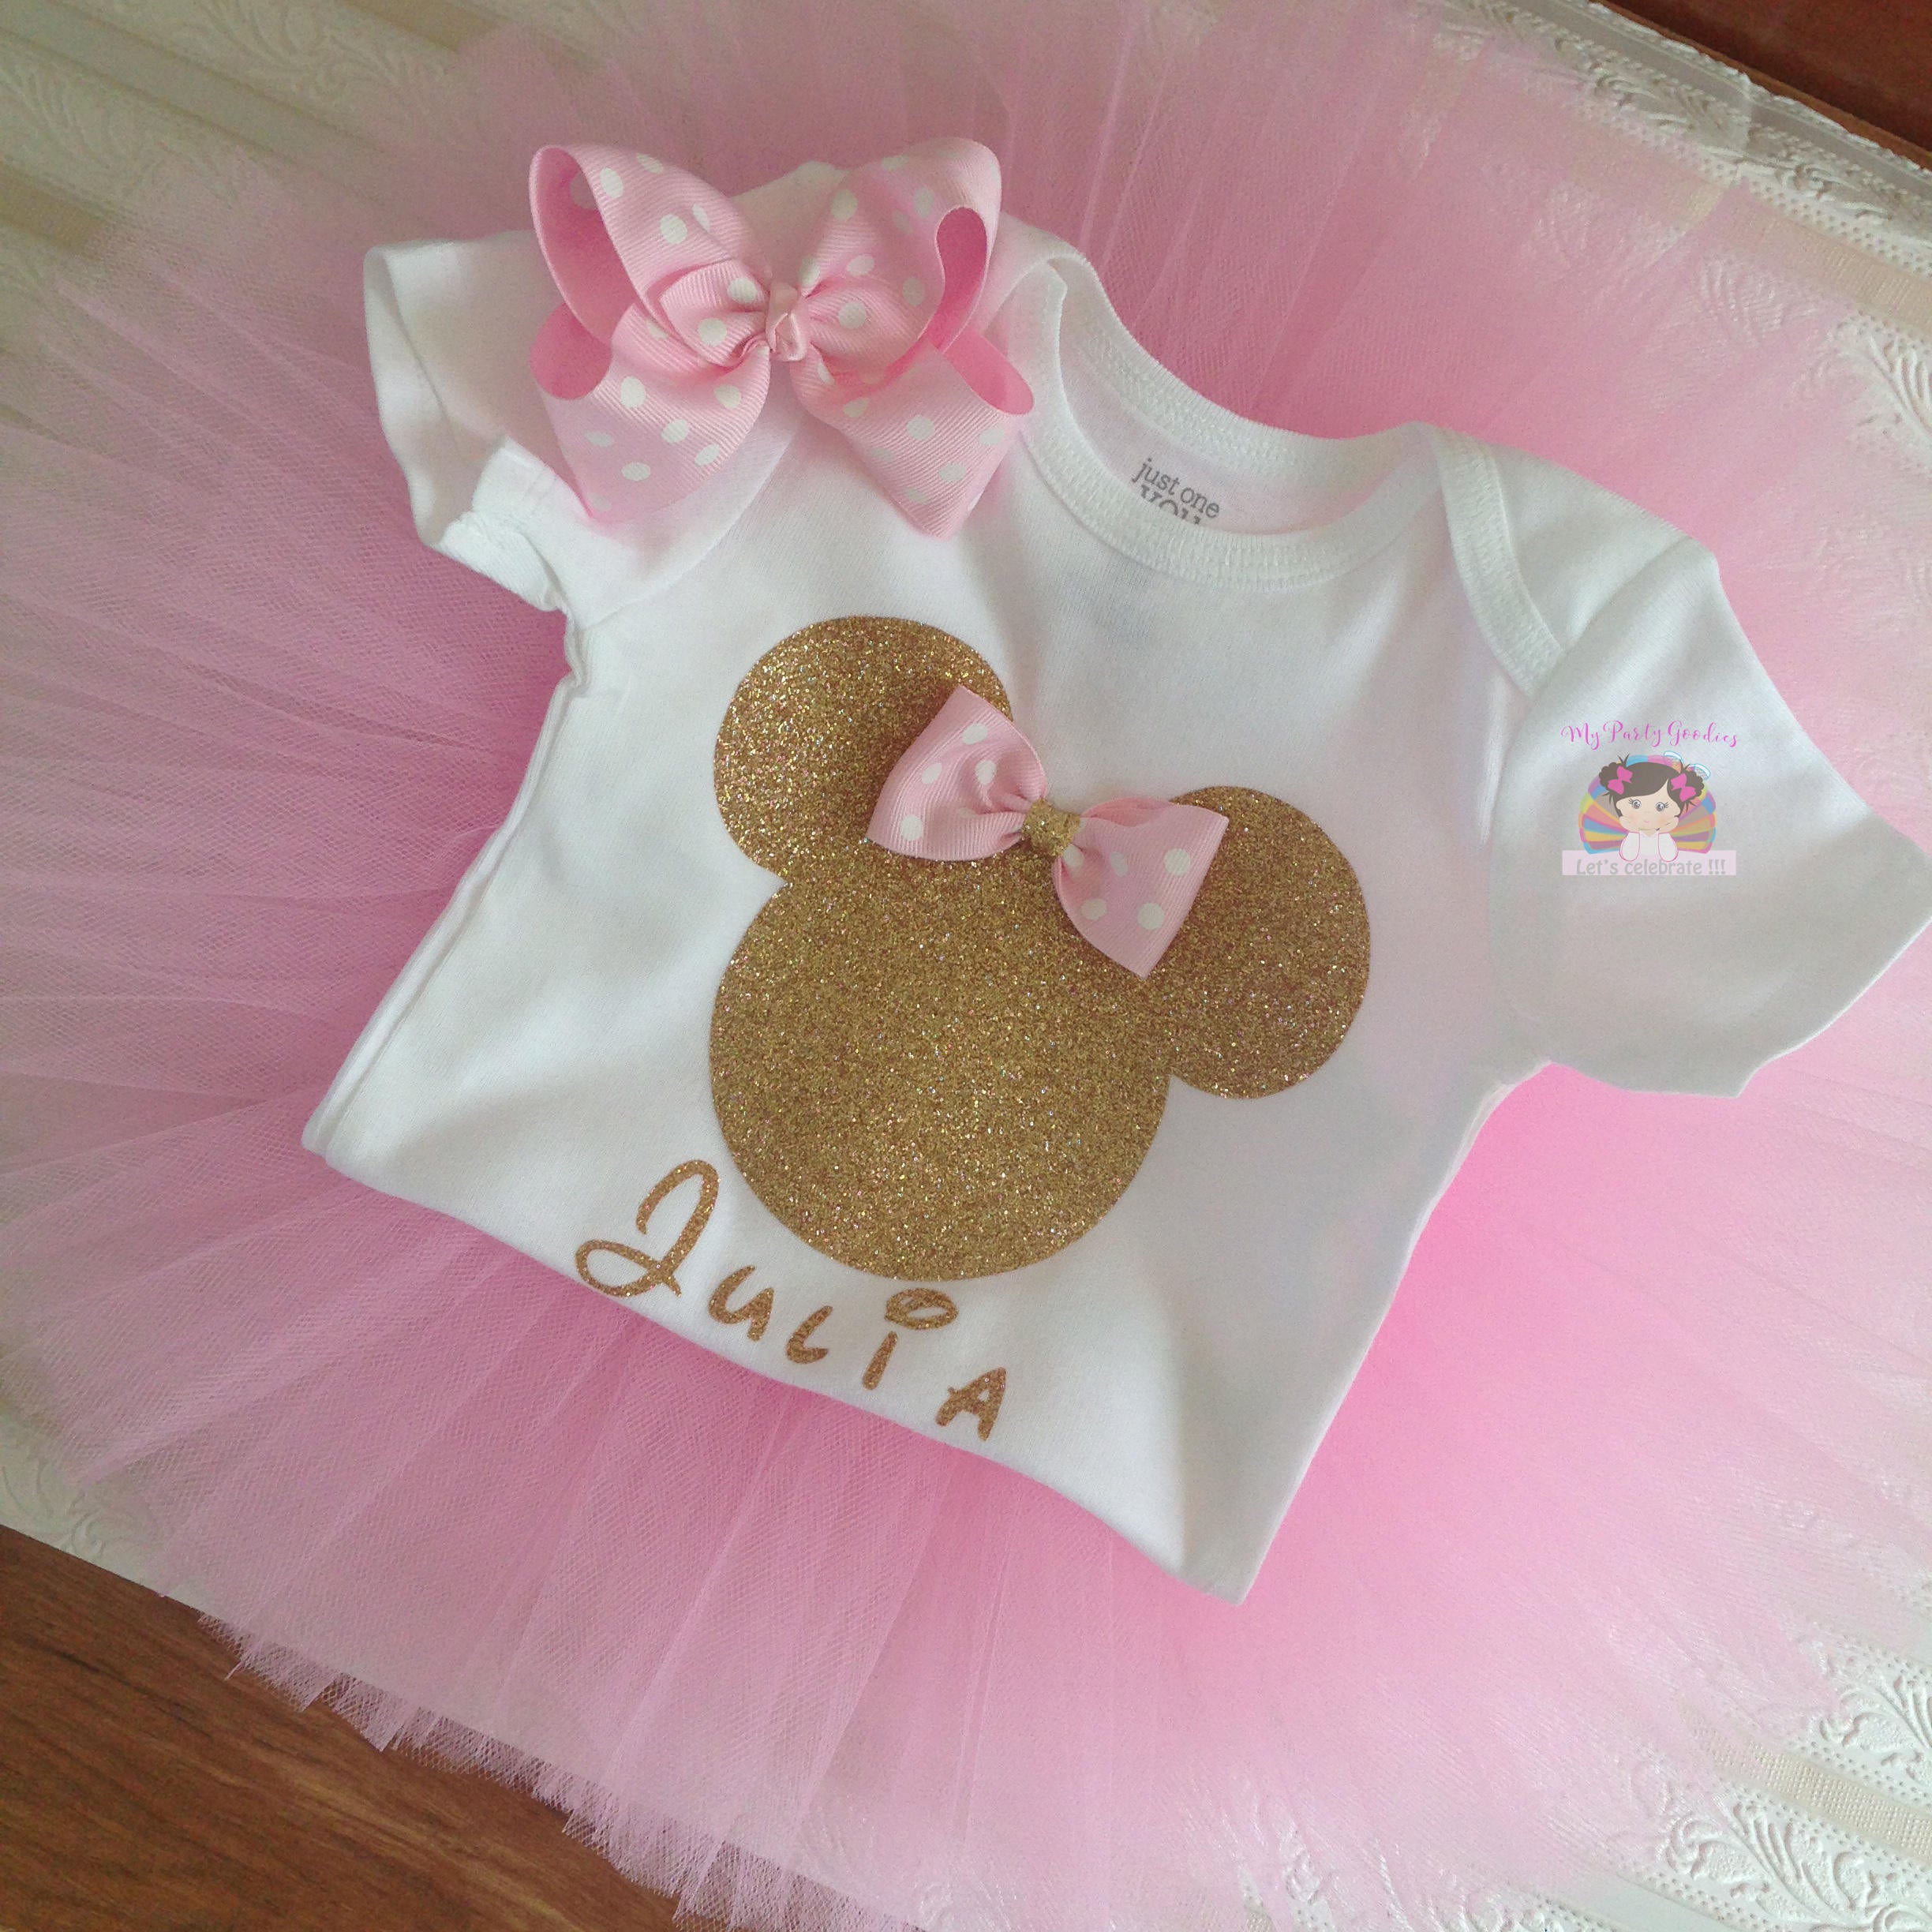 Baby Pink and Gold Minnie Mouse Tutu Set-First Pink birthday outfit